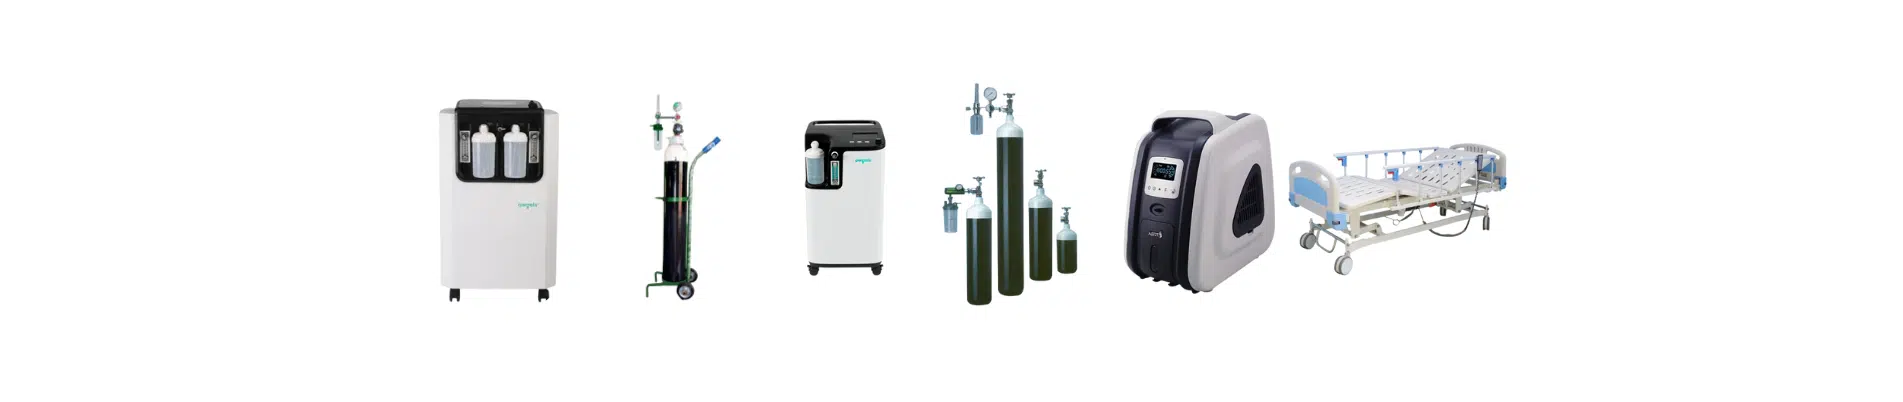 Oxygen Concentrator Price In Bangladesh